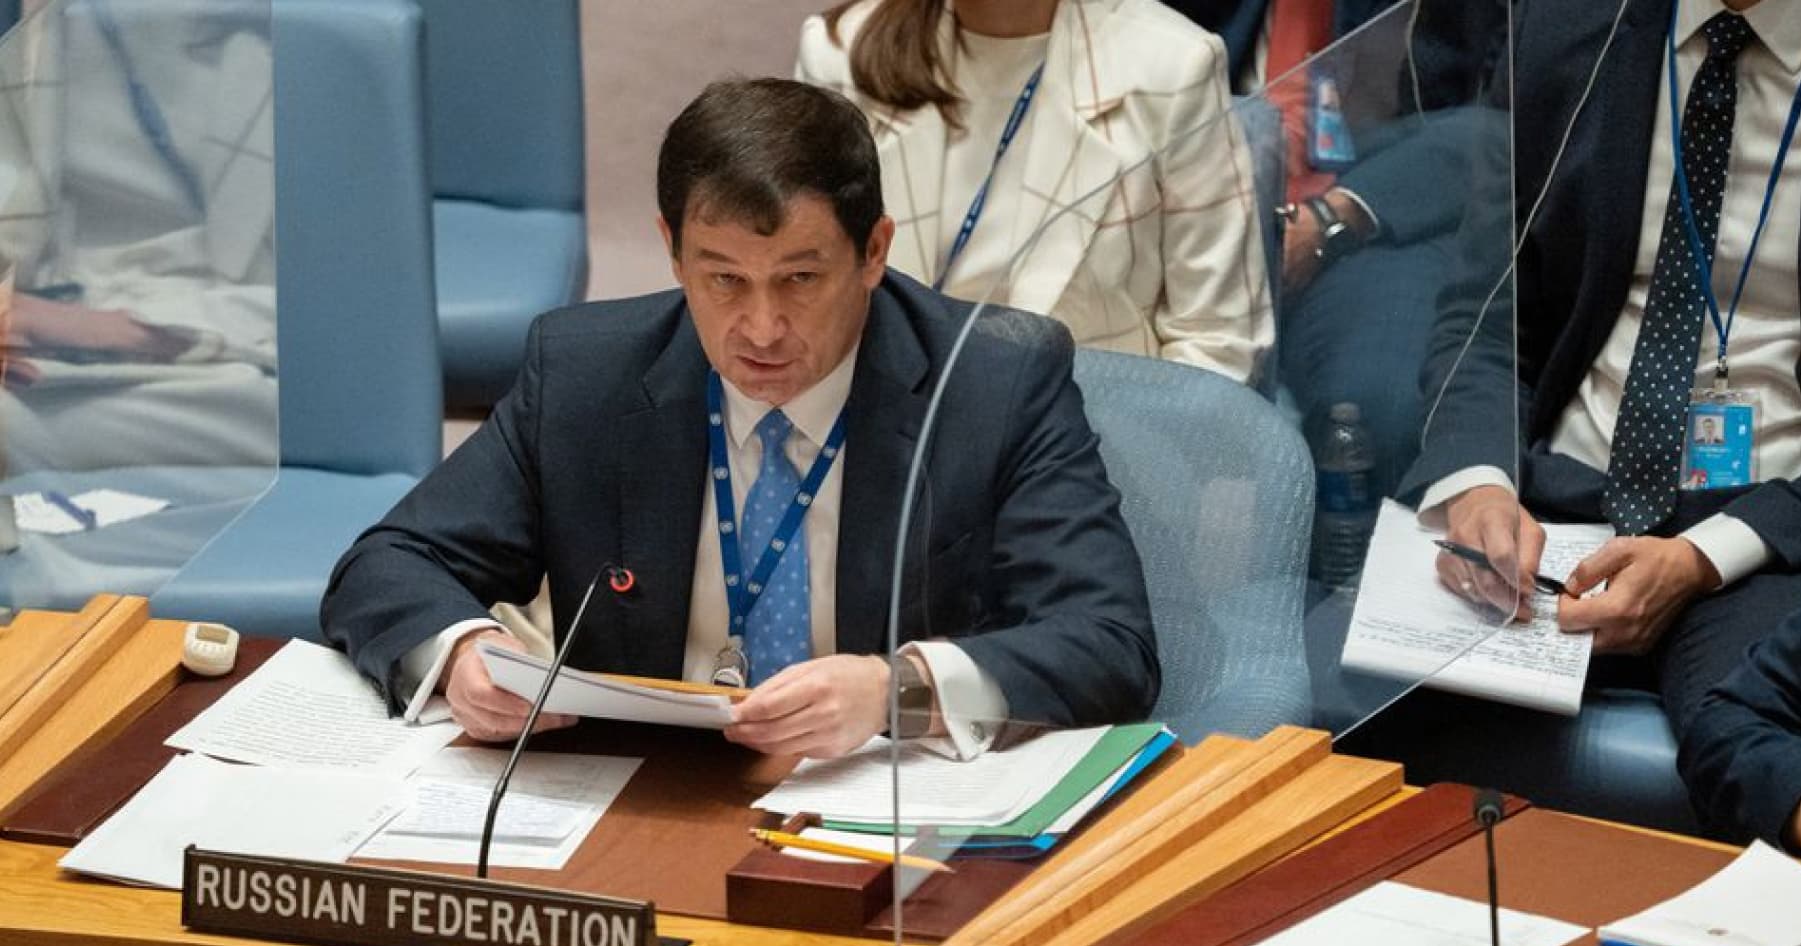 The UN Security Council held a closed-door meeting at Russia's request regarding the alleged use of a "dirty bomb" by Ukraine